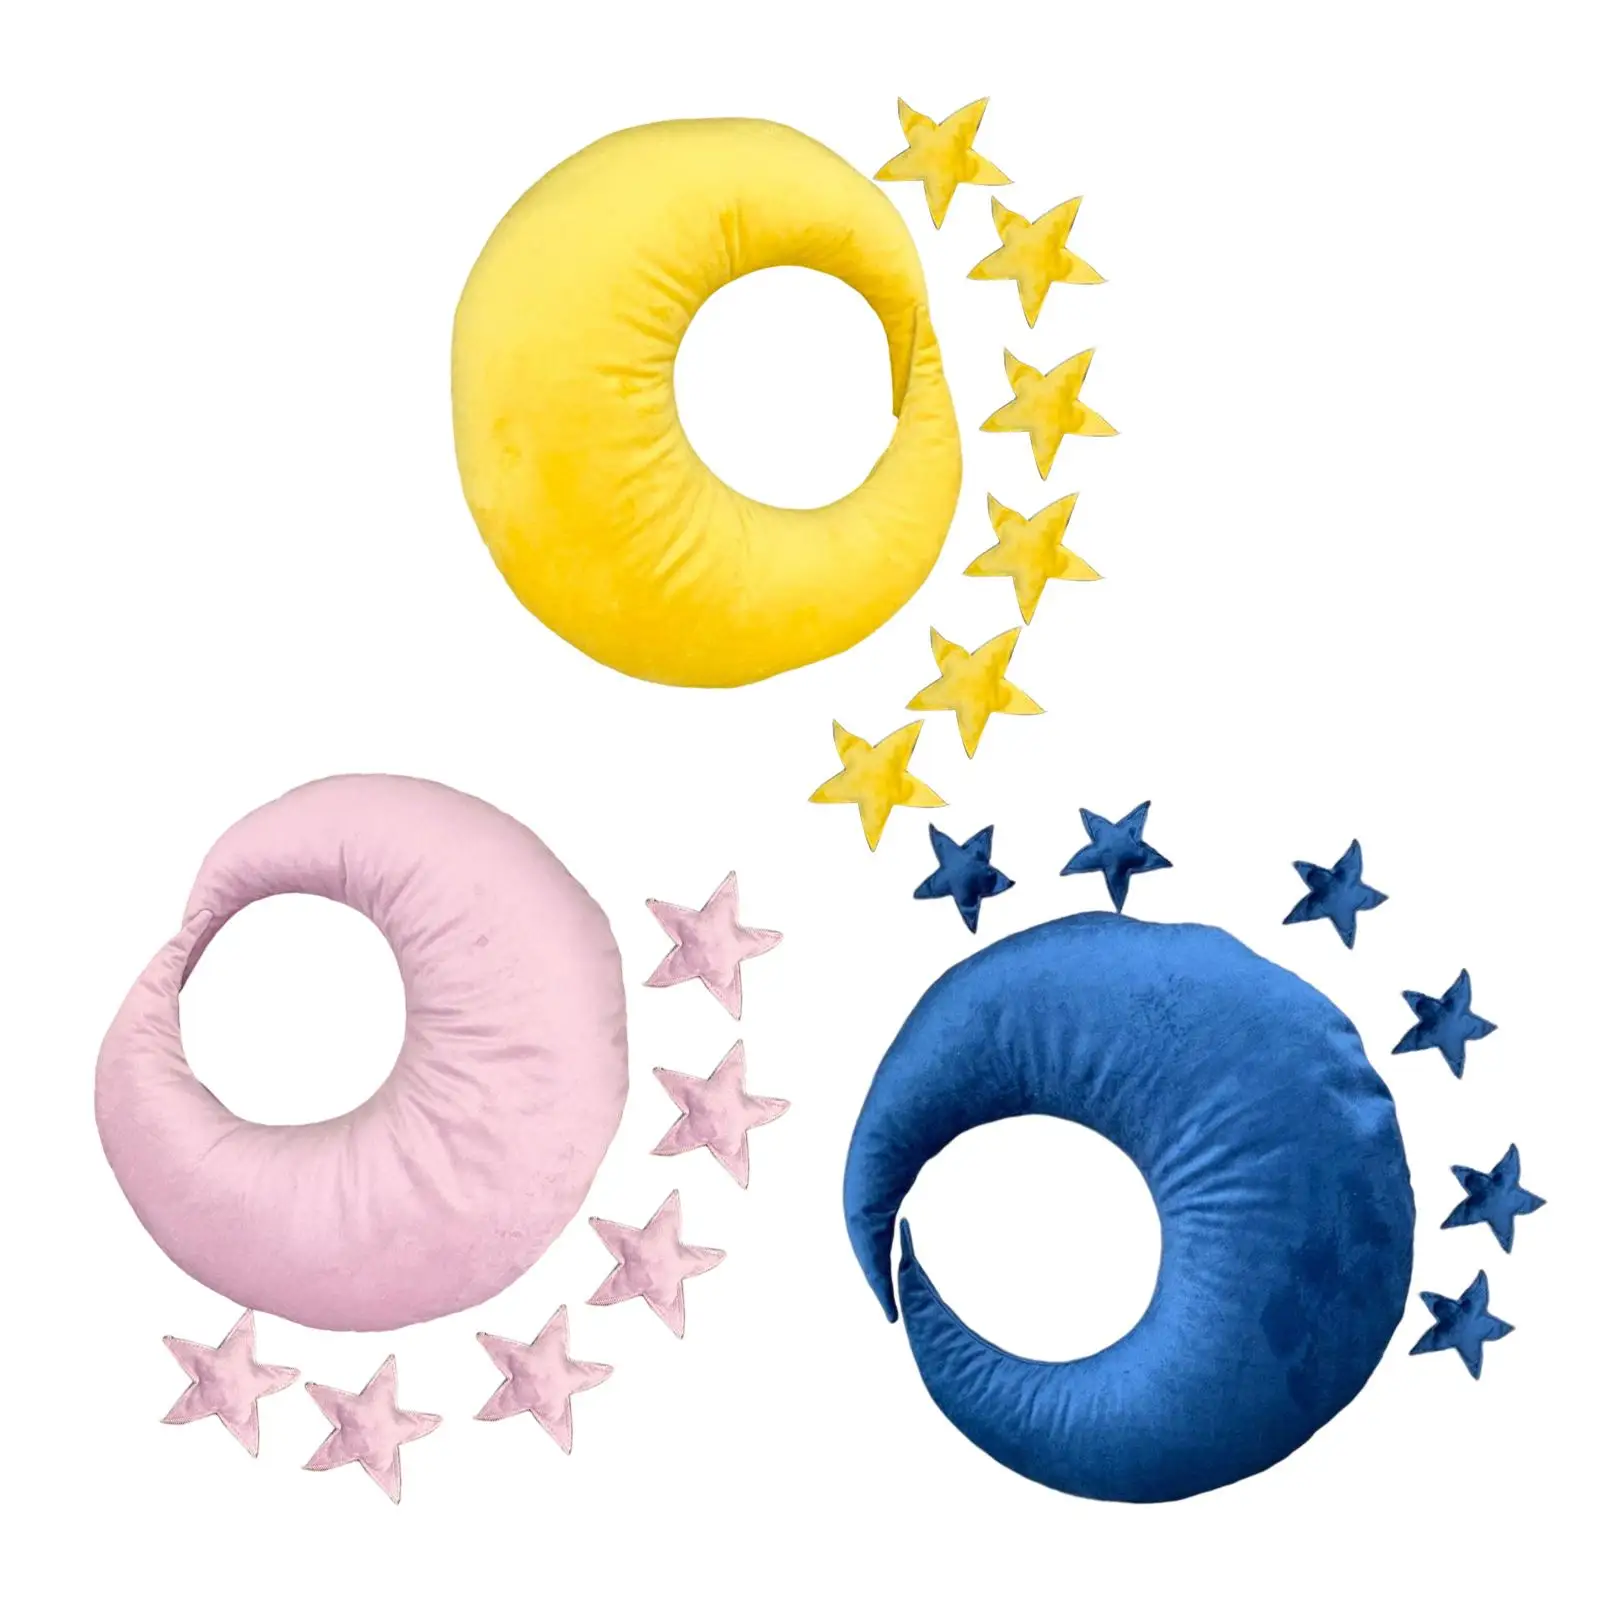 

Baby Photo Prop Moon Shape Pillow Decoration Photo Props Home Decoration fully Moon and A Hundred Days for Boys Girls Twins